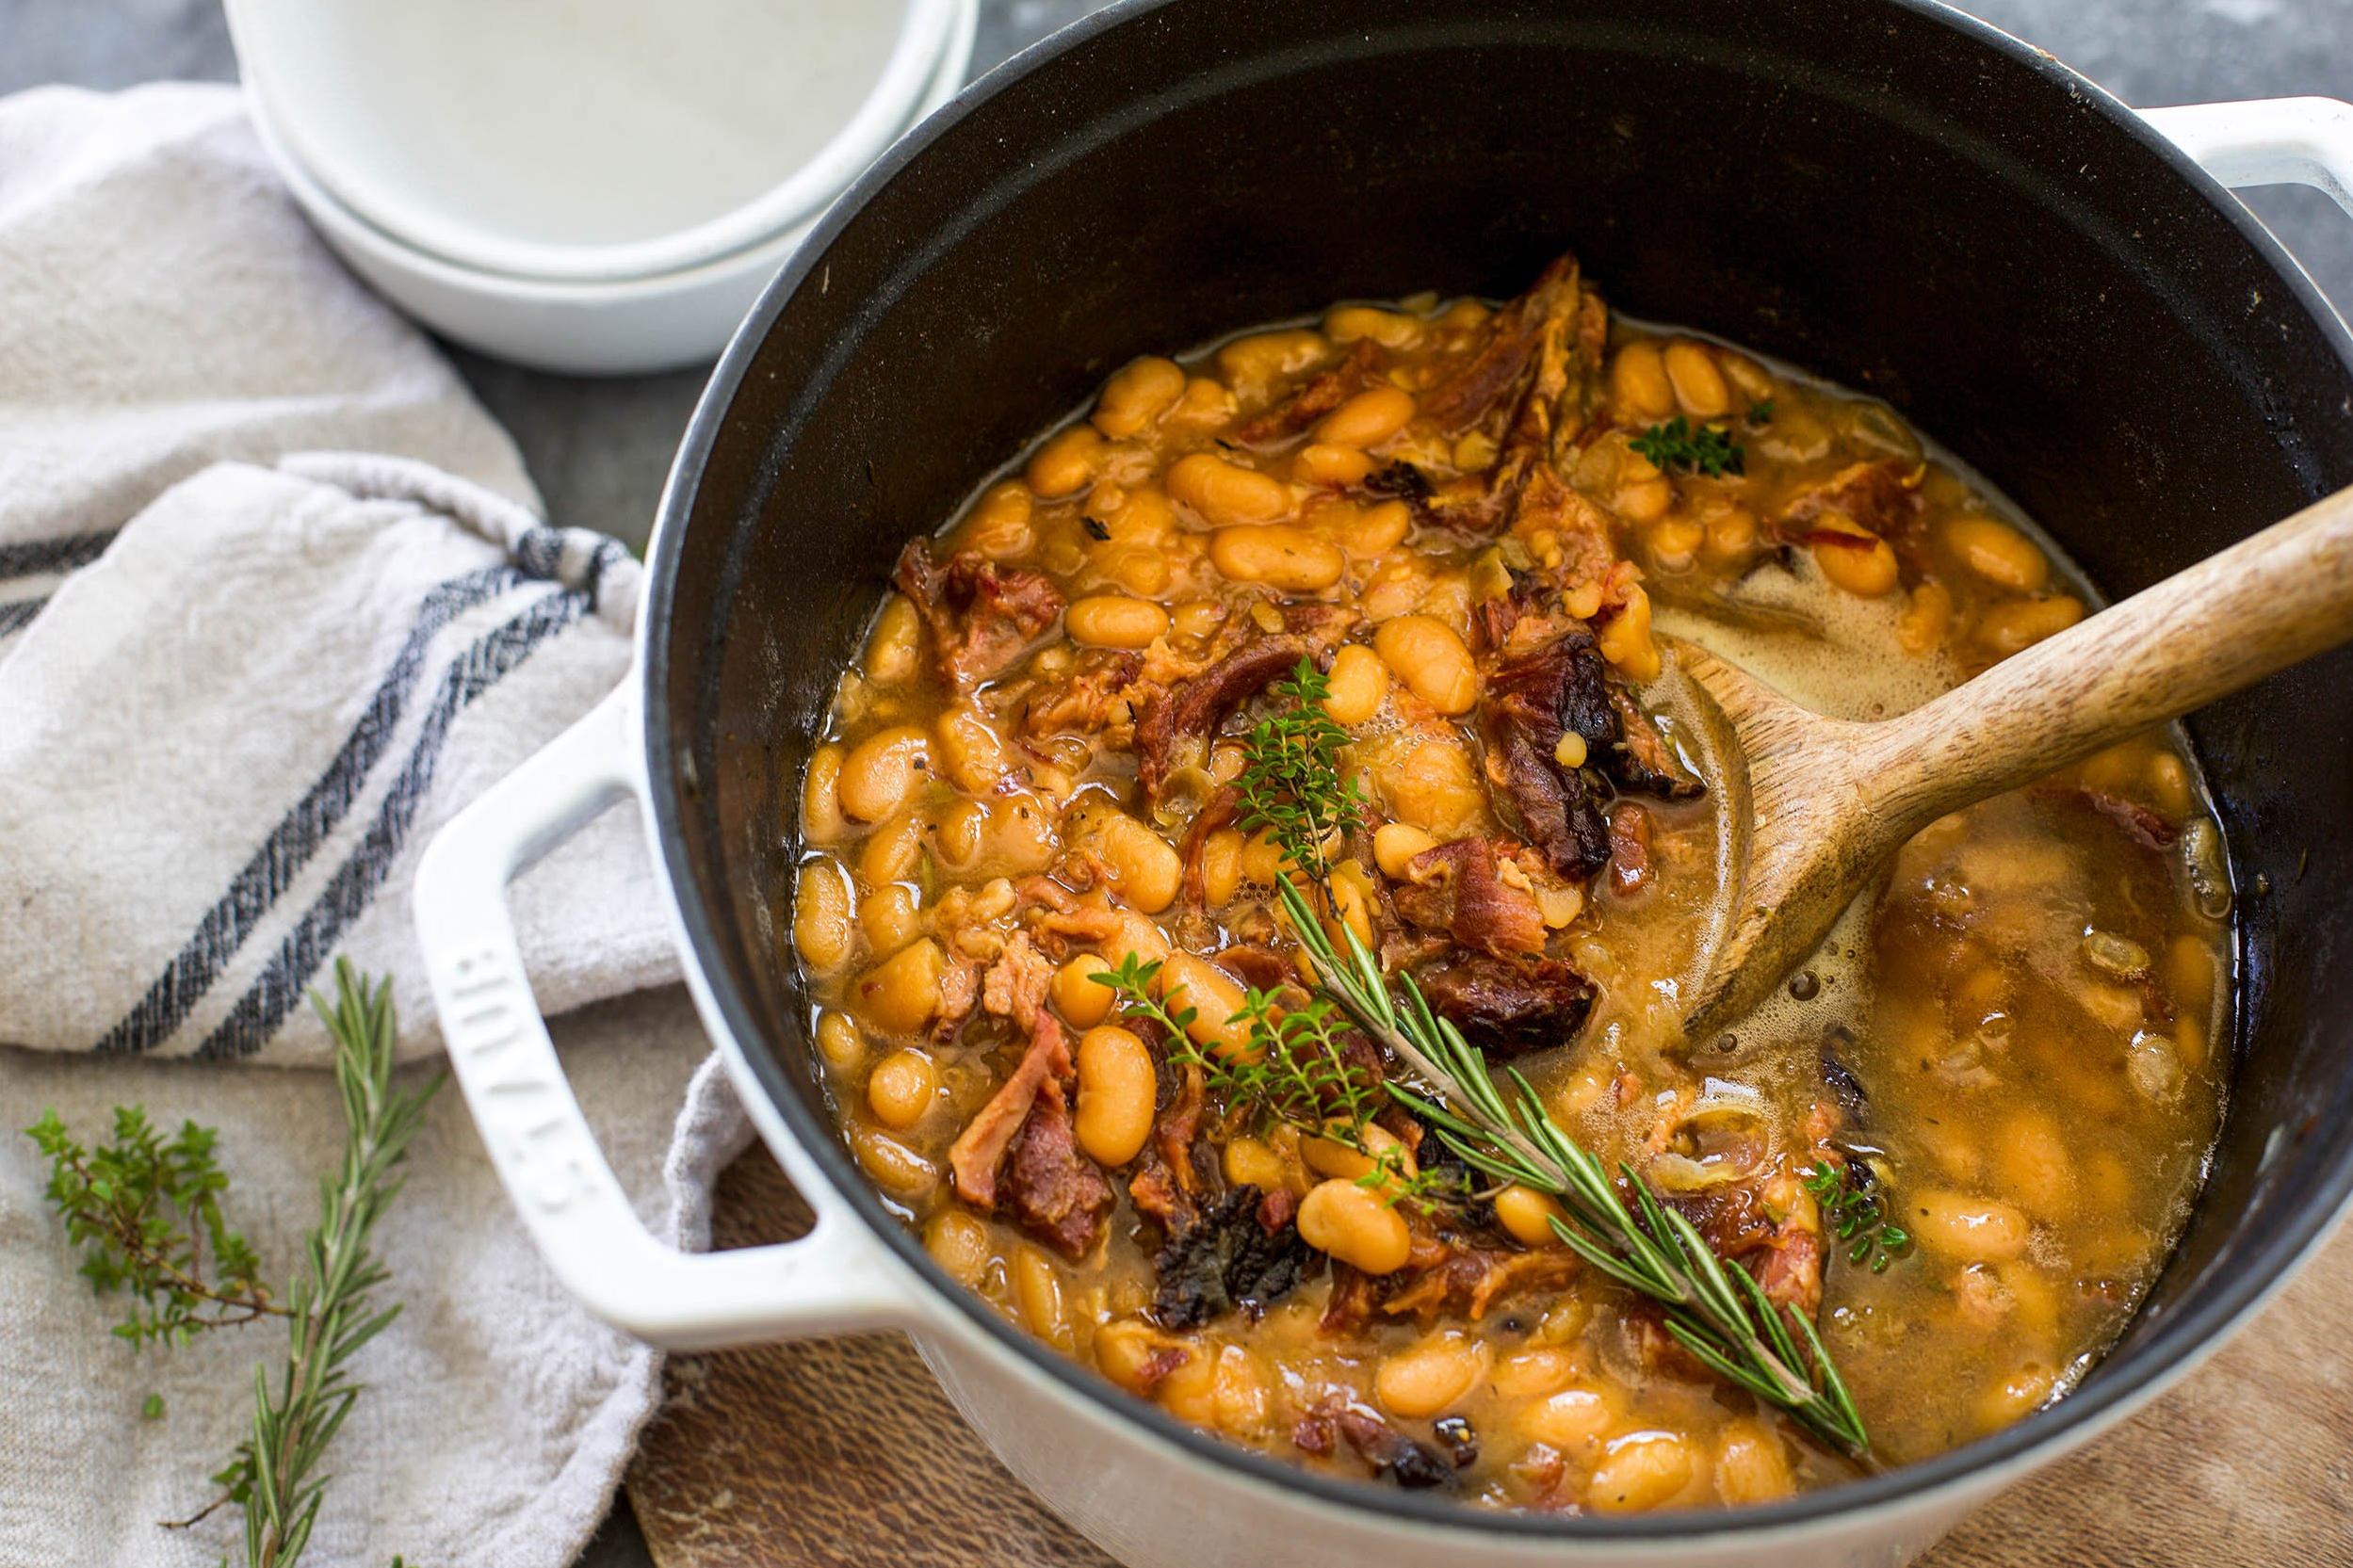  These creamy white beans will make you feel like you're sitting on a porch swing in the south.